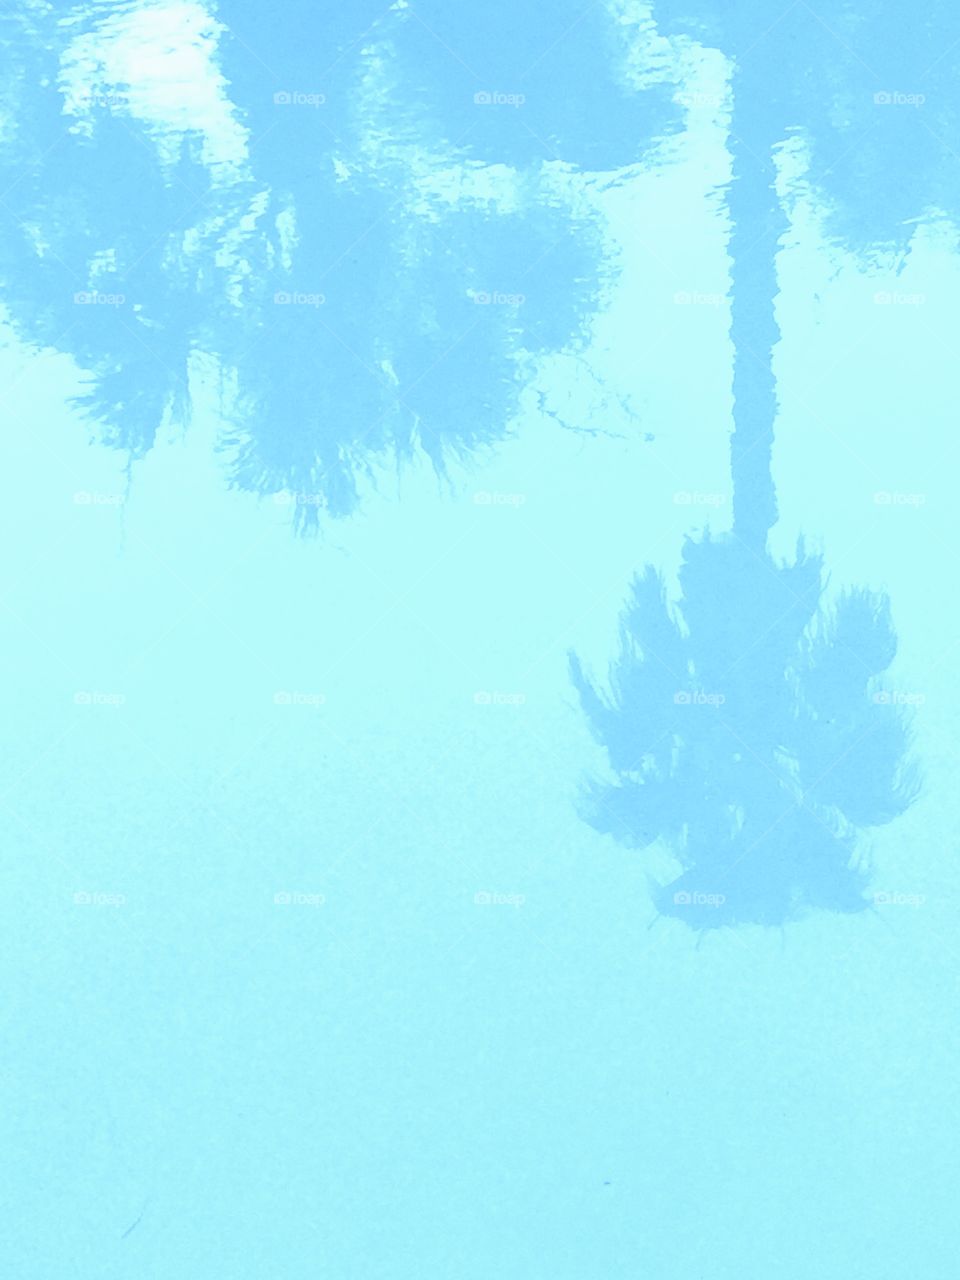 Palms reflected on pool 